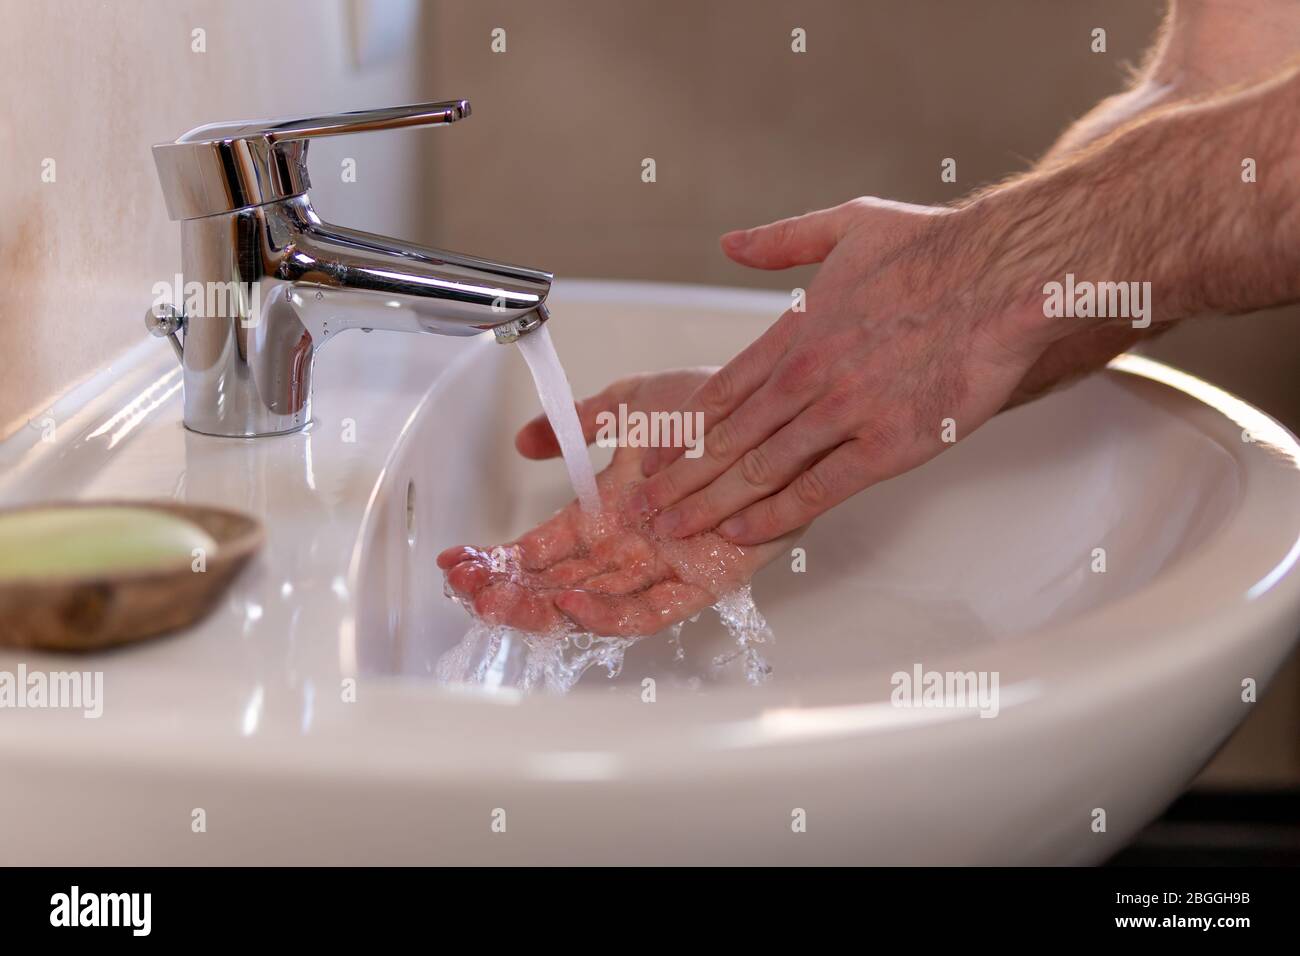 Caucasian man thoroughly washing hands in wash basin under water tap. Personal hygiene as coronavirus COVID-19 pandemic spread prevention. Stock Photo